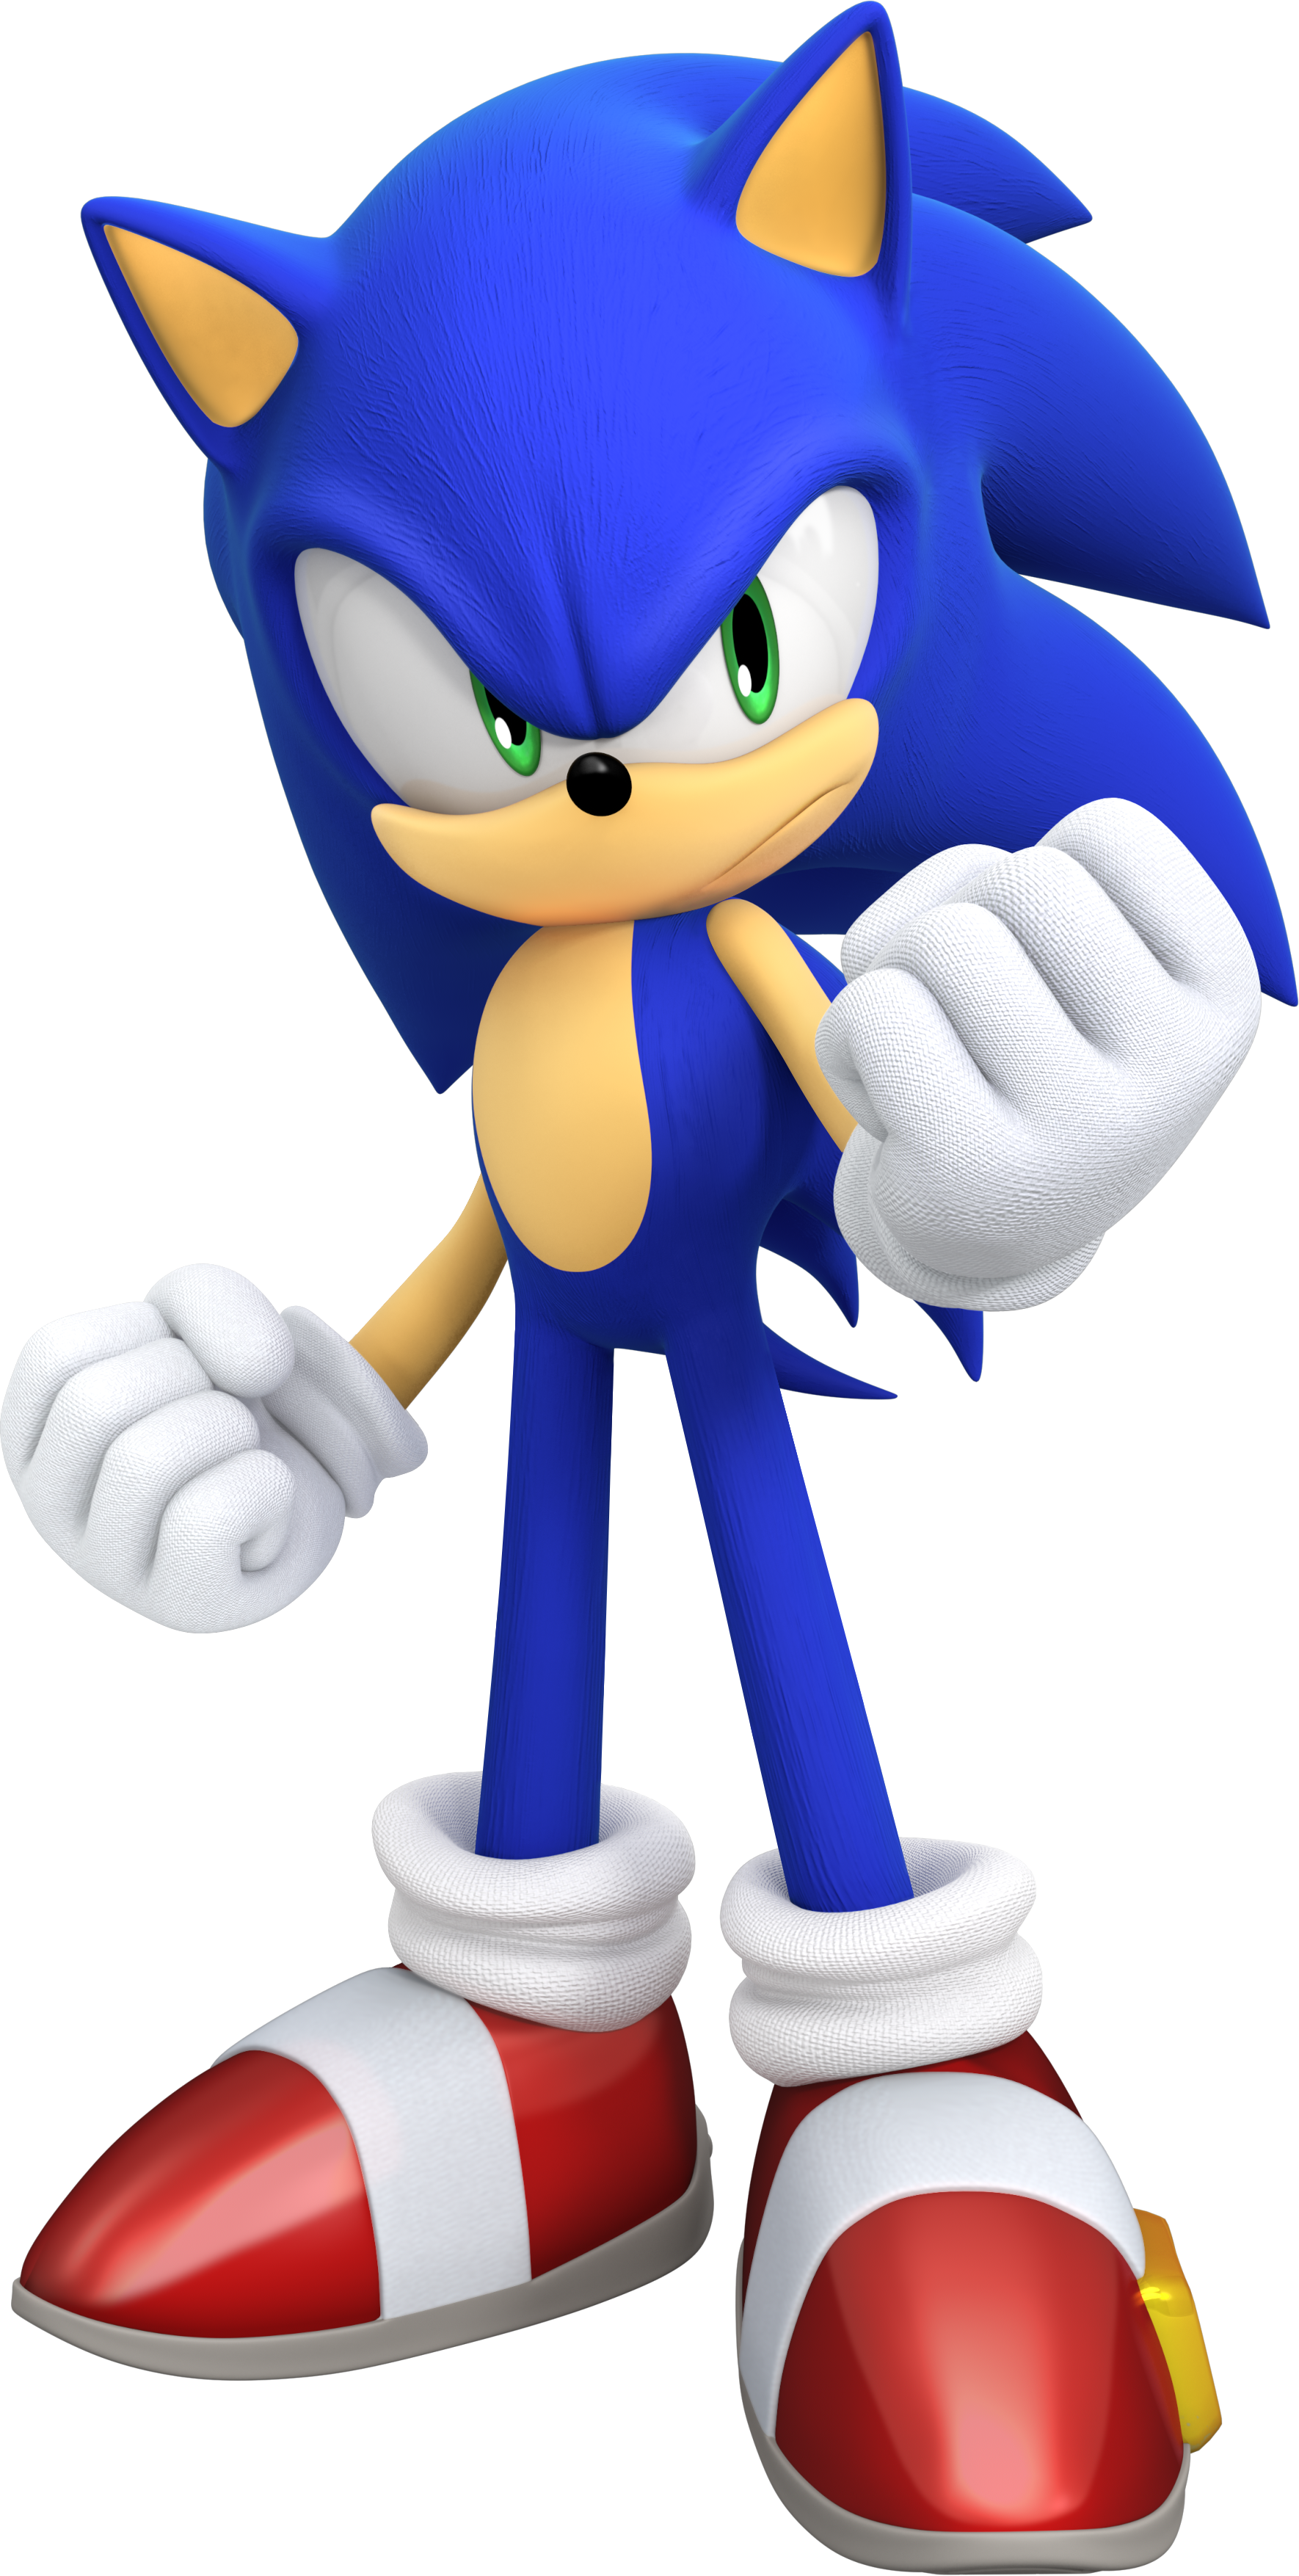 https://static.wikia.nocookie.net/sonic-universe/images/2/27/SFModernSonicRender.png/revision/latest?cb=20240104142537